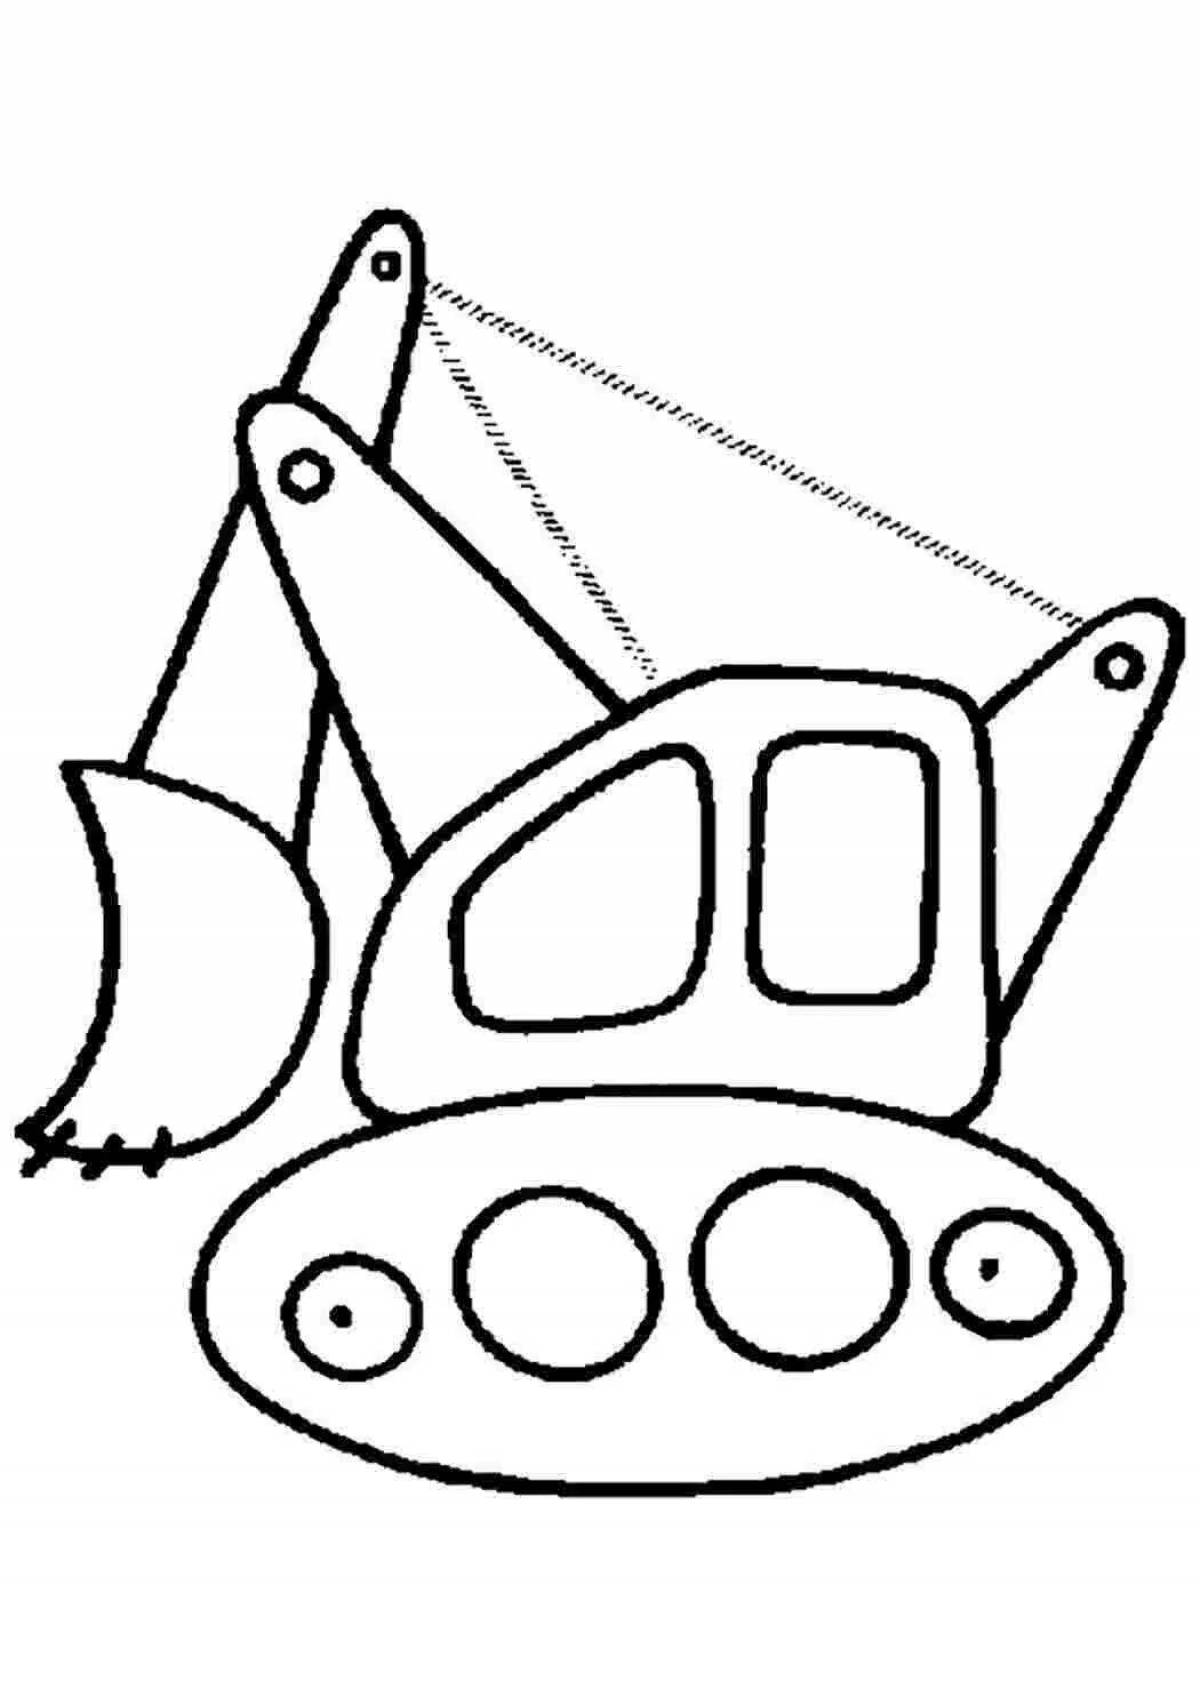 Adorable excavator coloring book for boys